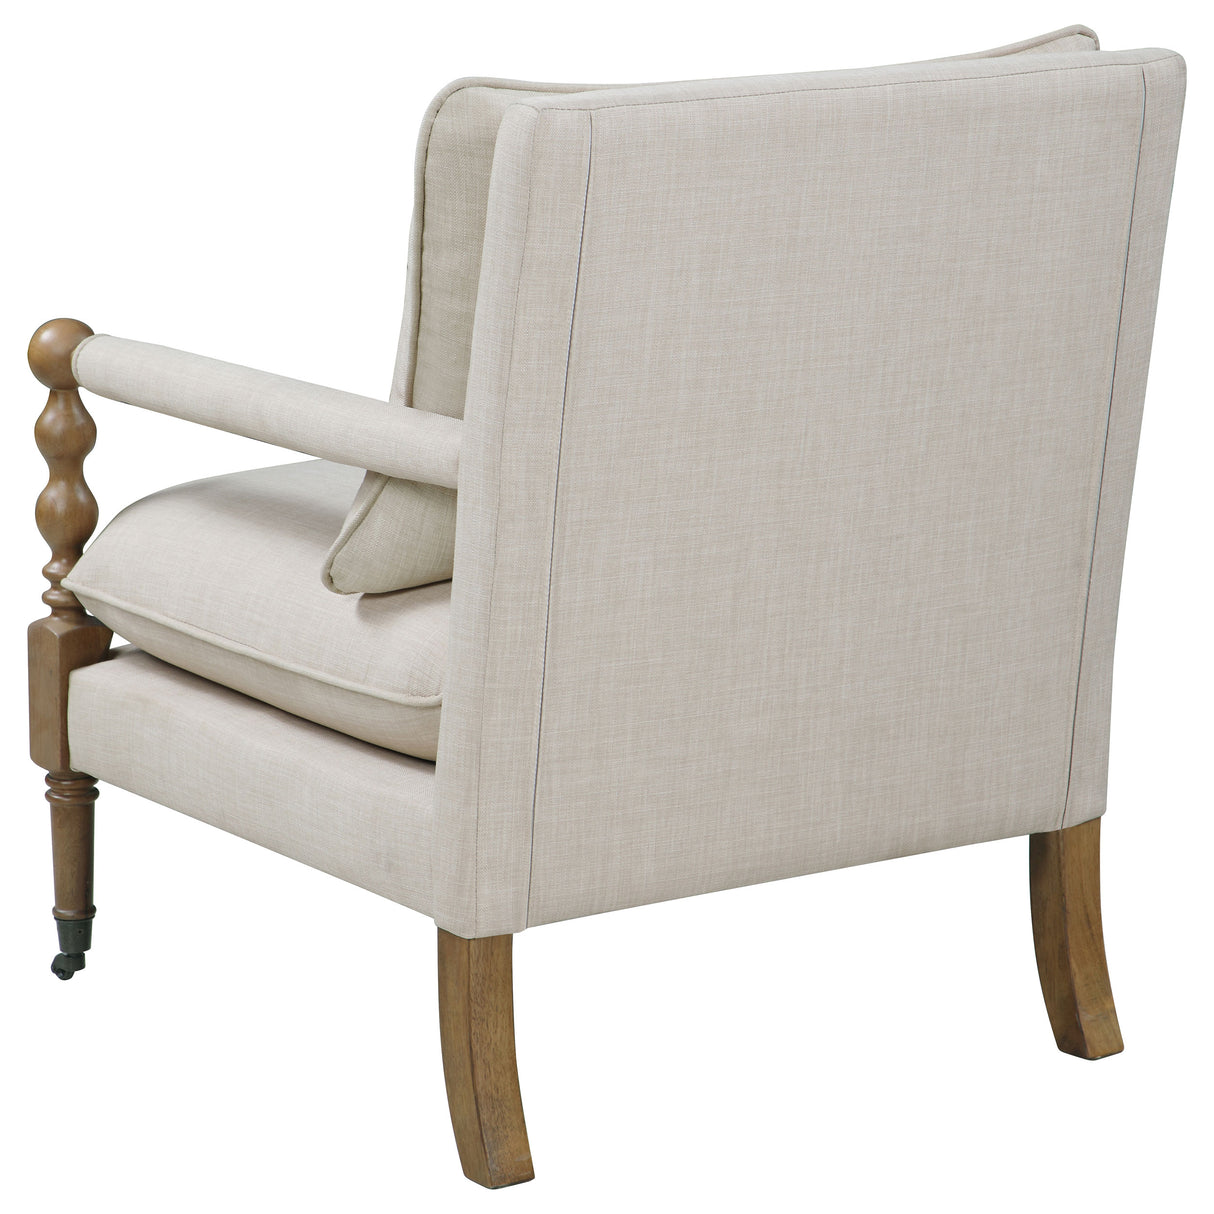 Accent Chair - Dempsy Upholstered Accent Chair with Casters Beige